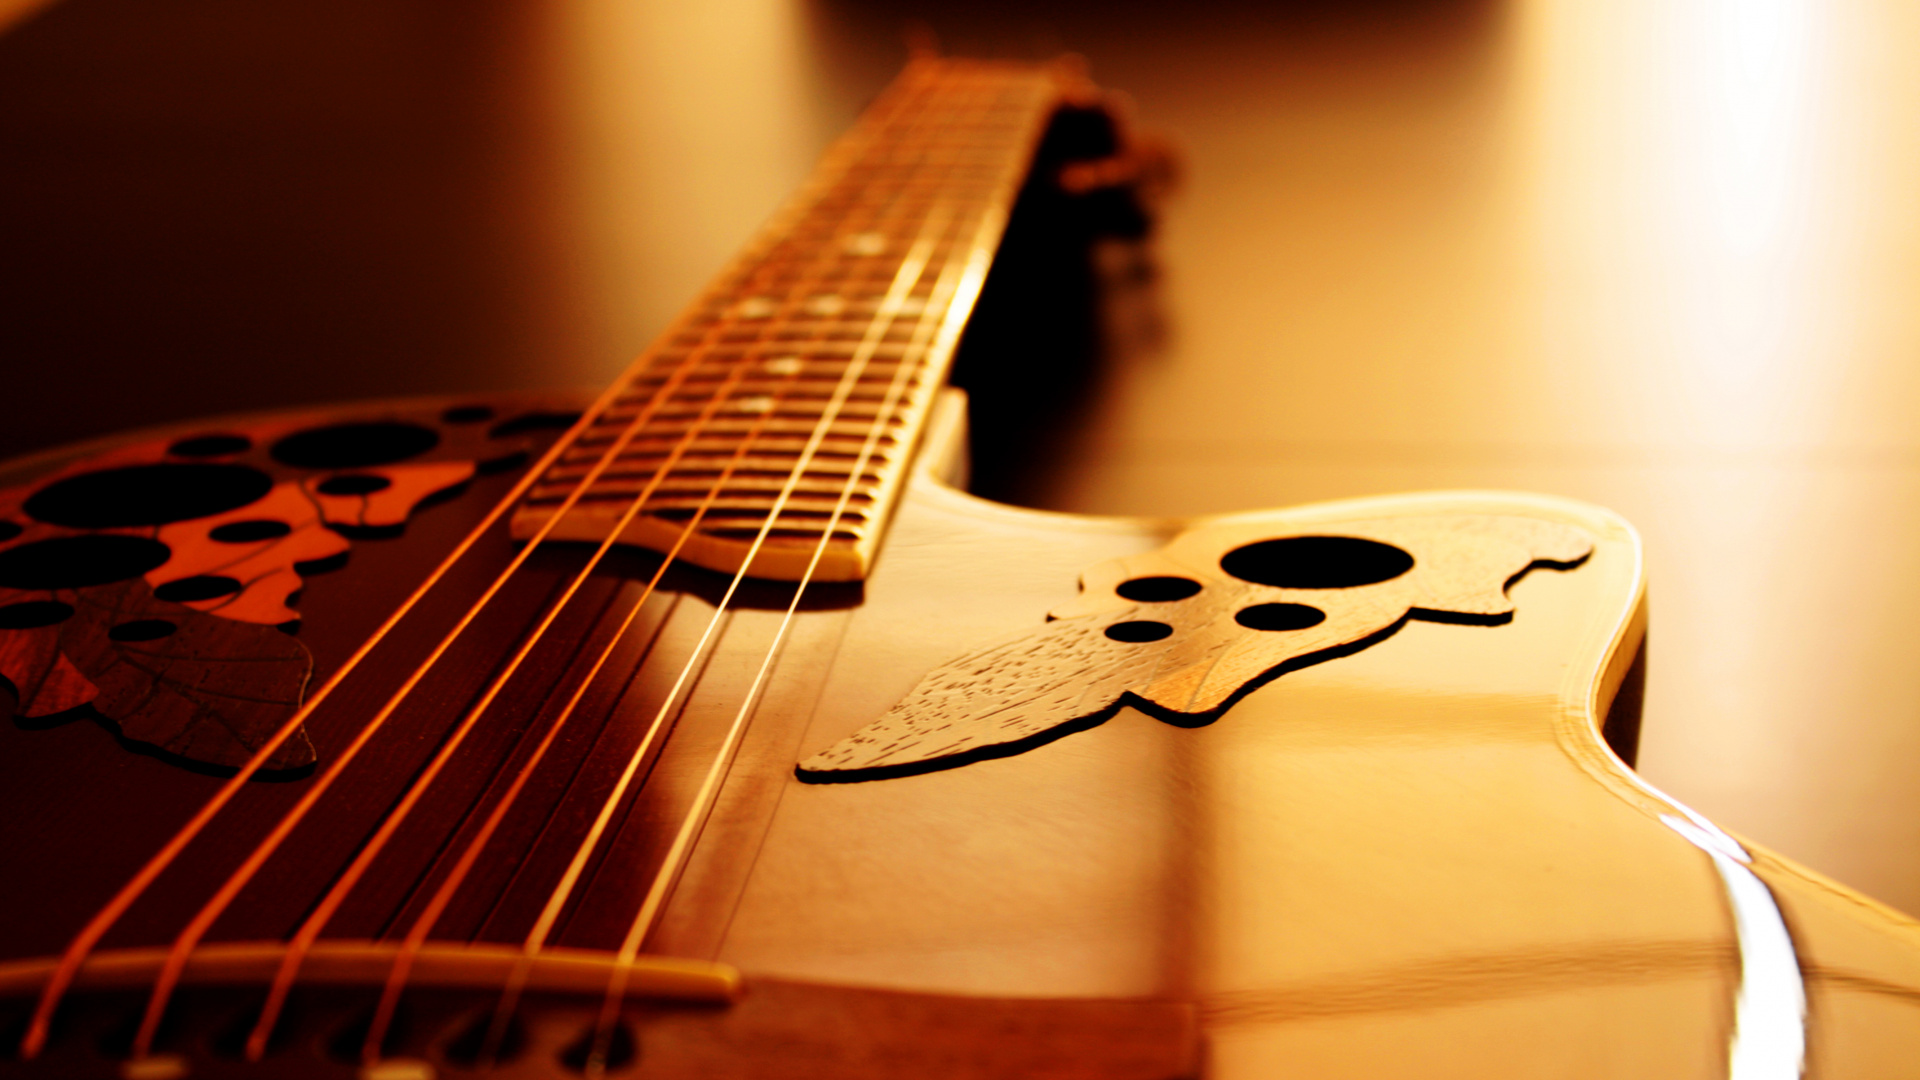 Guitar, Acoustic Guitar, String Instrument, Musical Instrument, Plucked String Instruments. Wallpaper in 1920x1080 Resolution